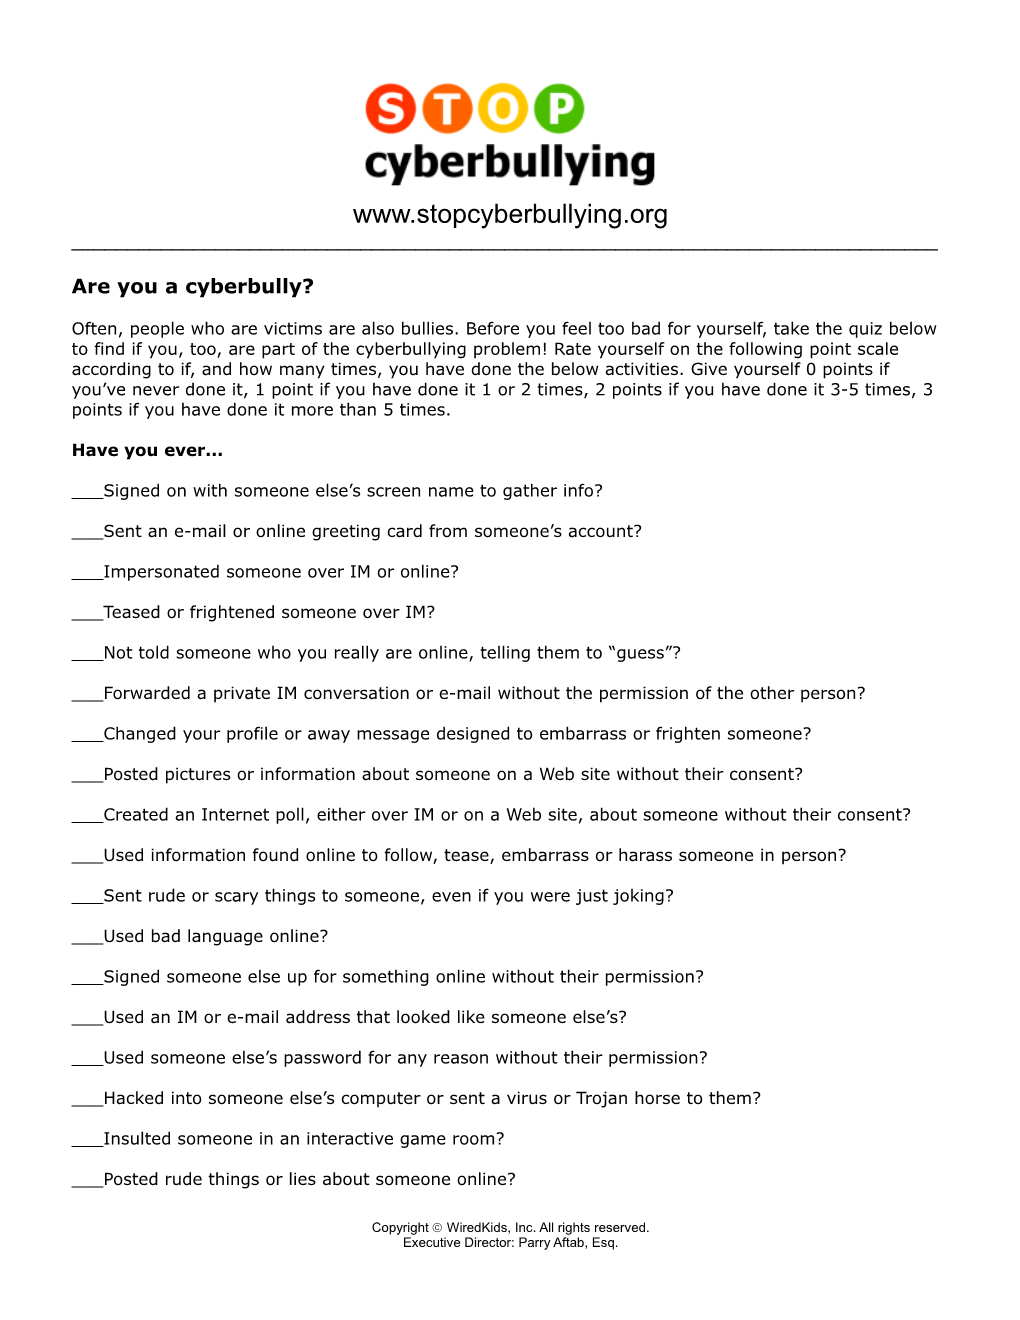 Are You a Cyberbully?